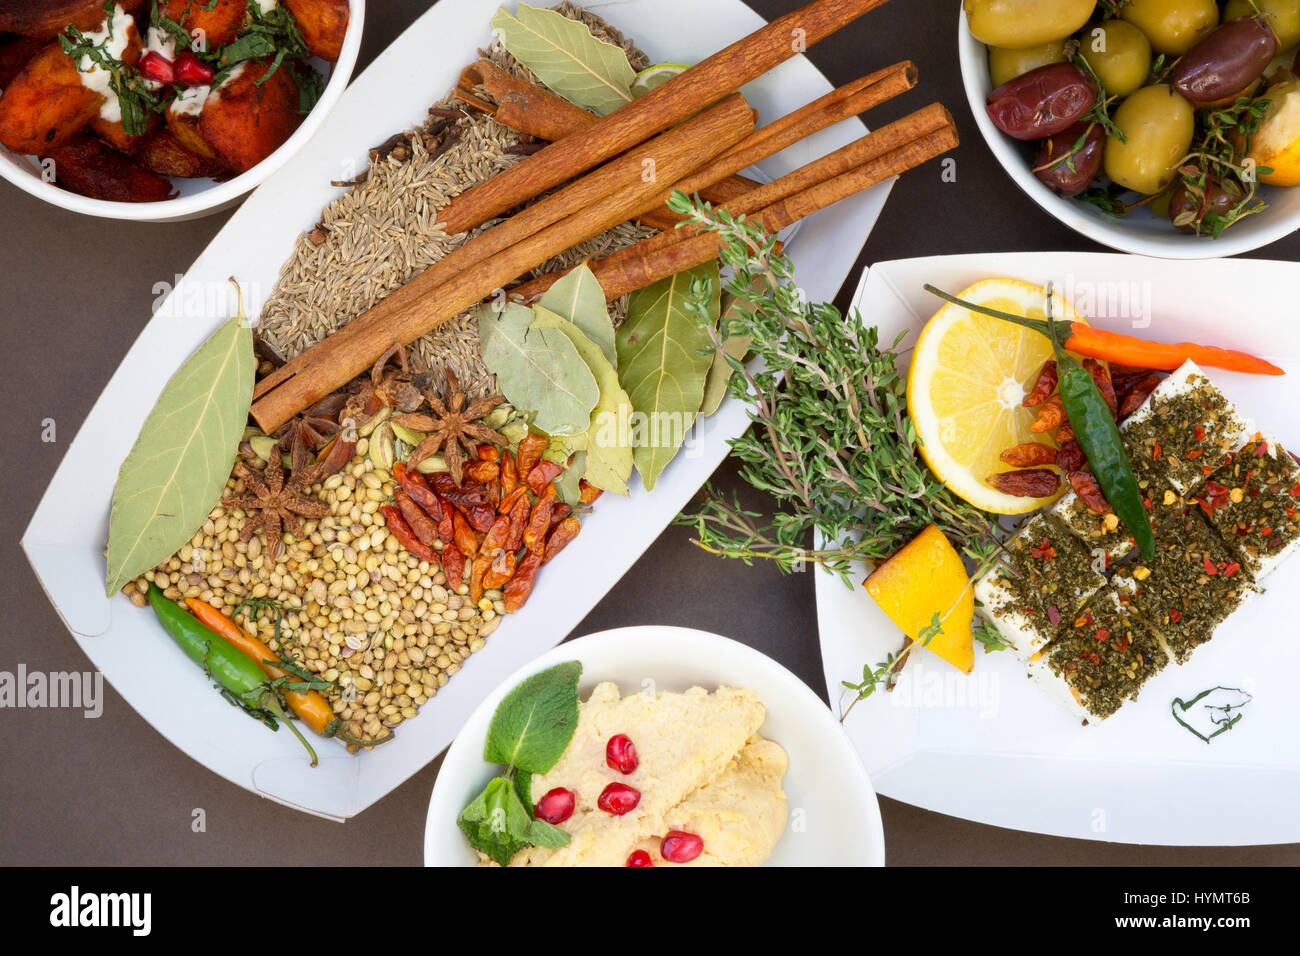 Food - Mezze - starters and spices - Middle East food Stock Photo